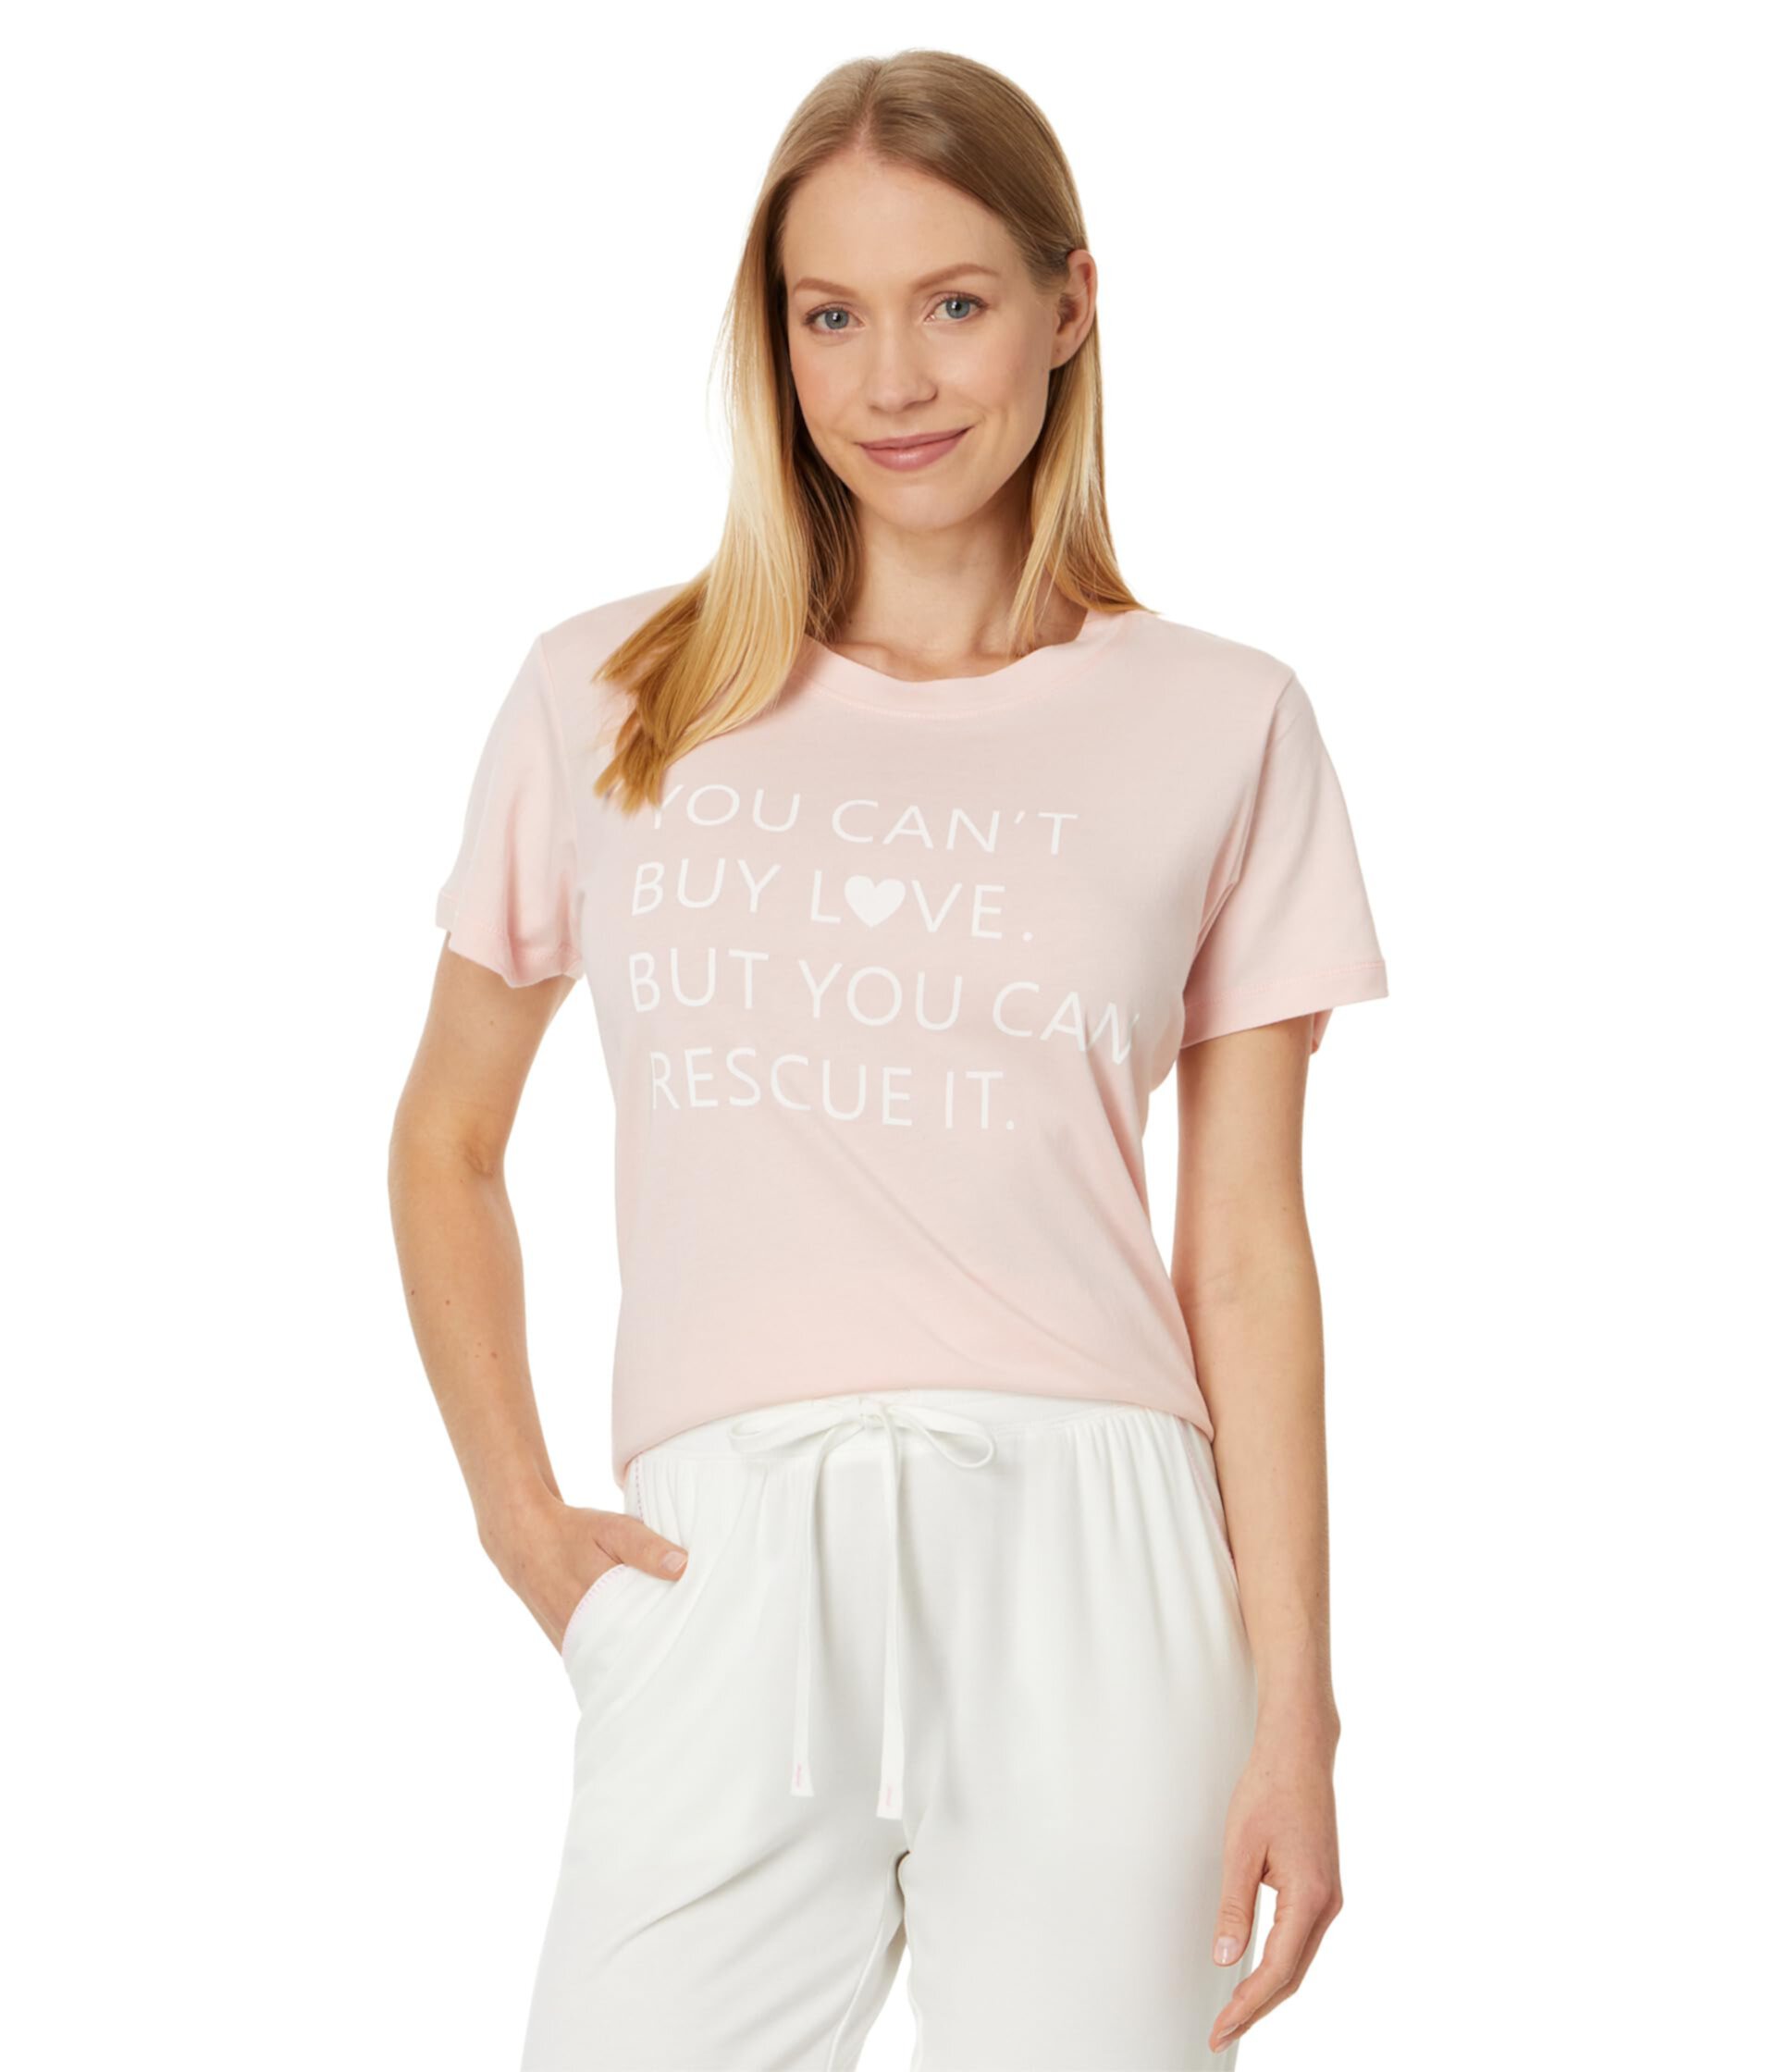 Rescued Love Short Sleeve Top P.J. Salvage